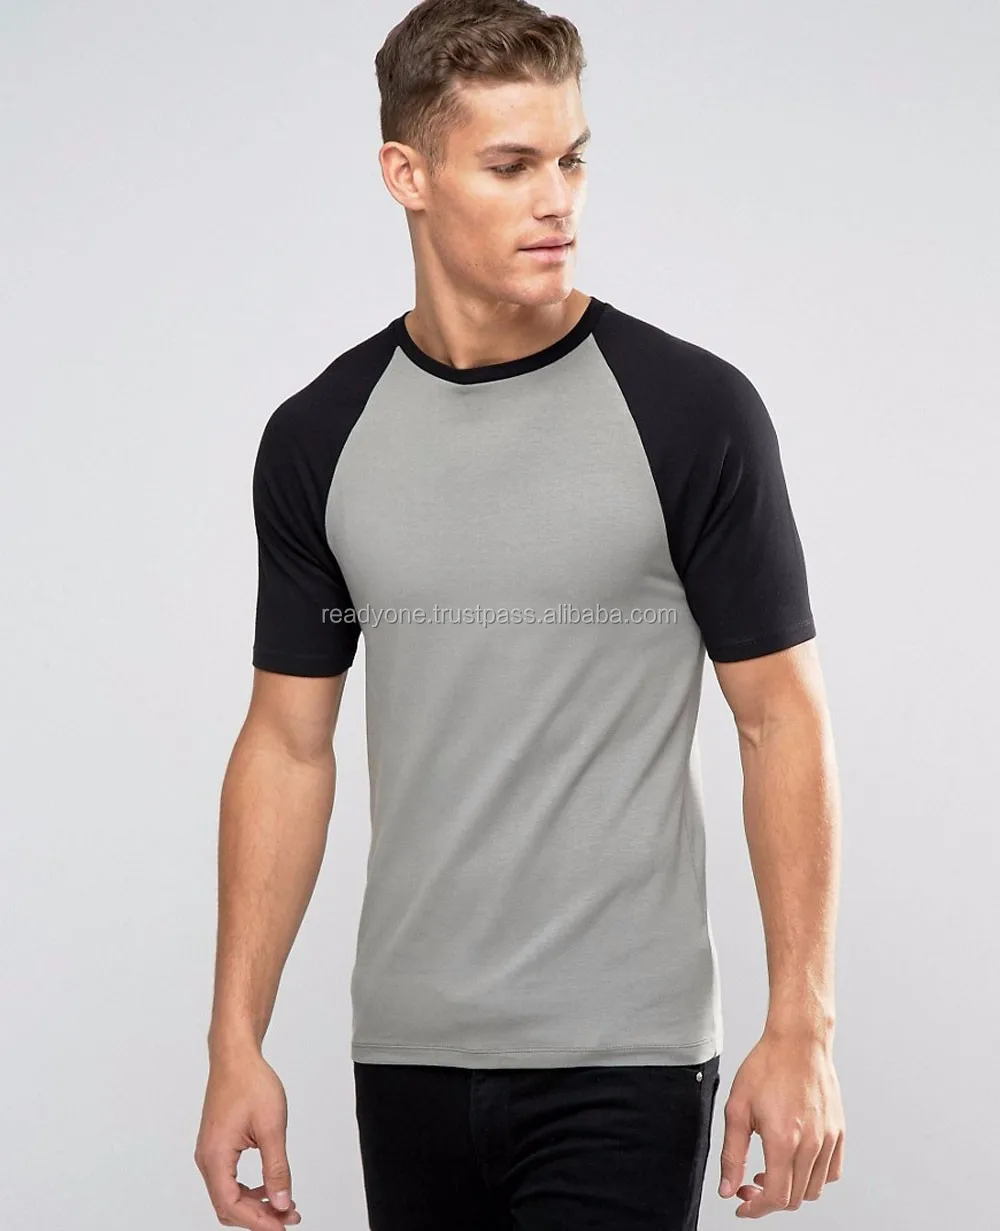 designer muscle fit shirts